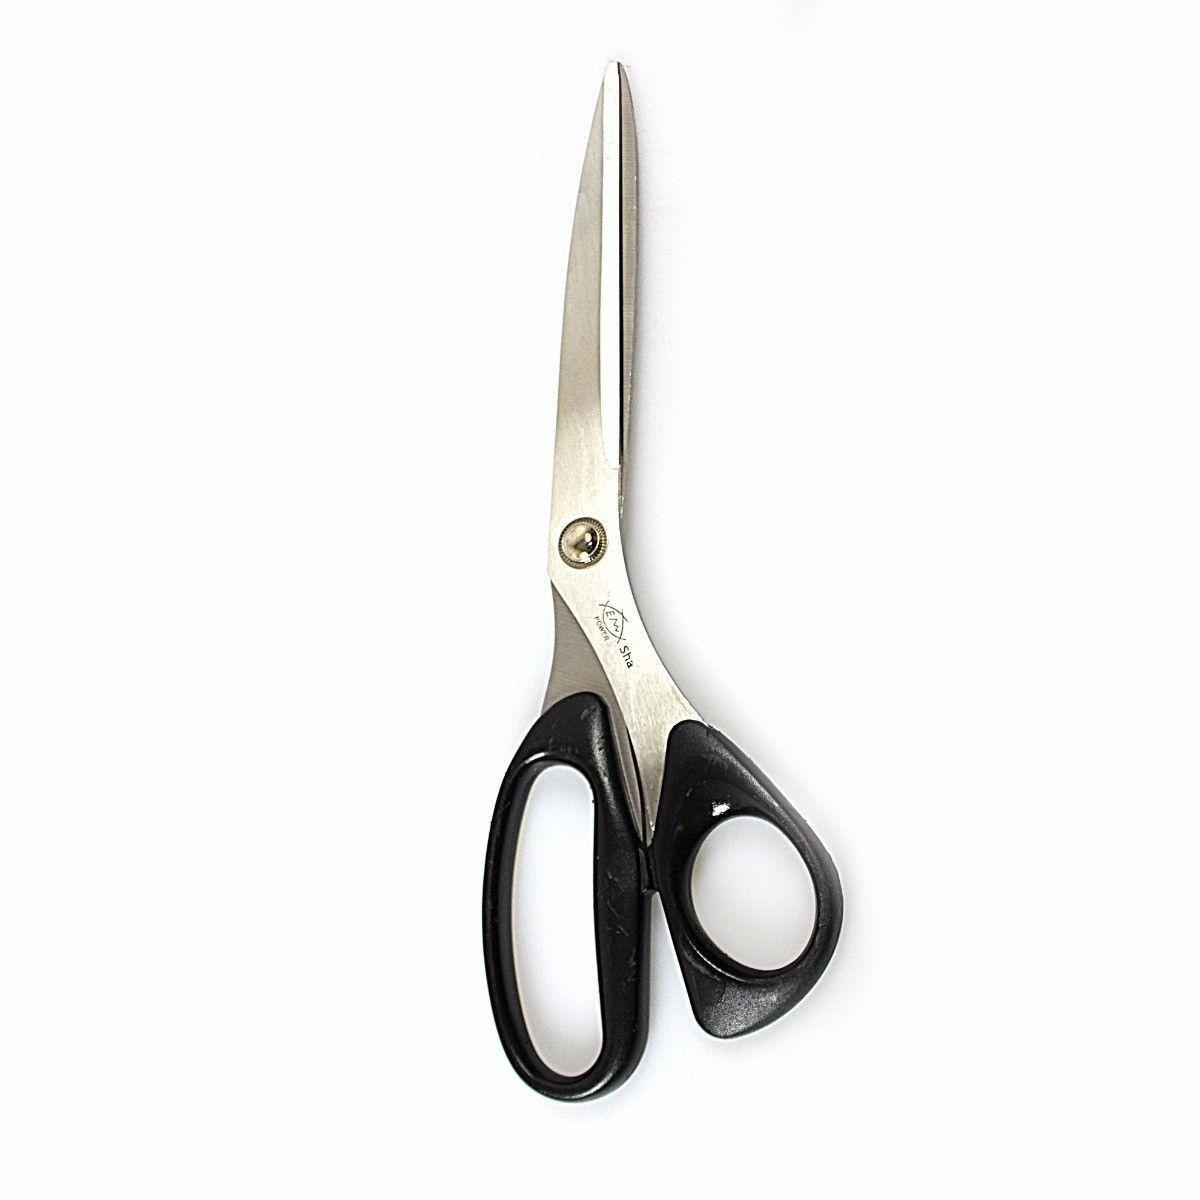 Stainless Steel ABS Handle Steel Blade Scissor 27cm 2794  A (Large Letter Rate)